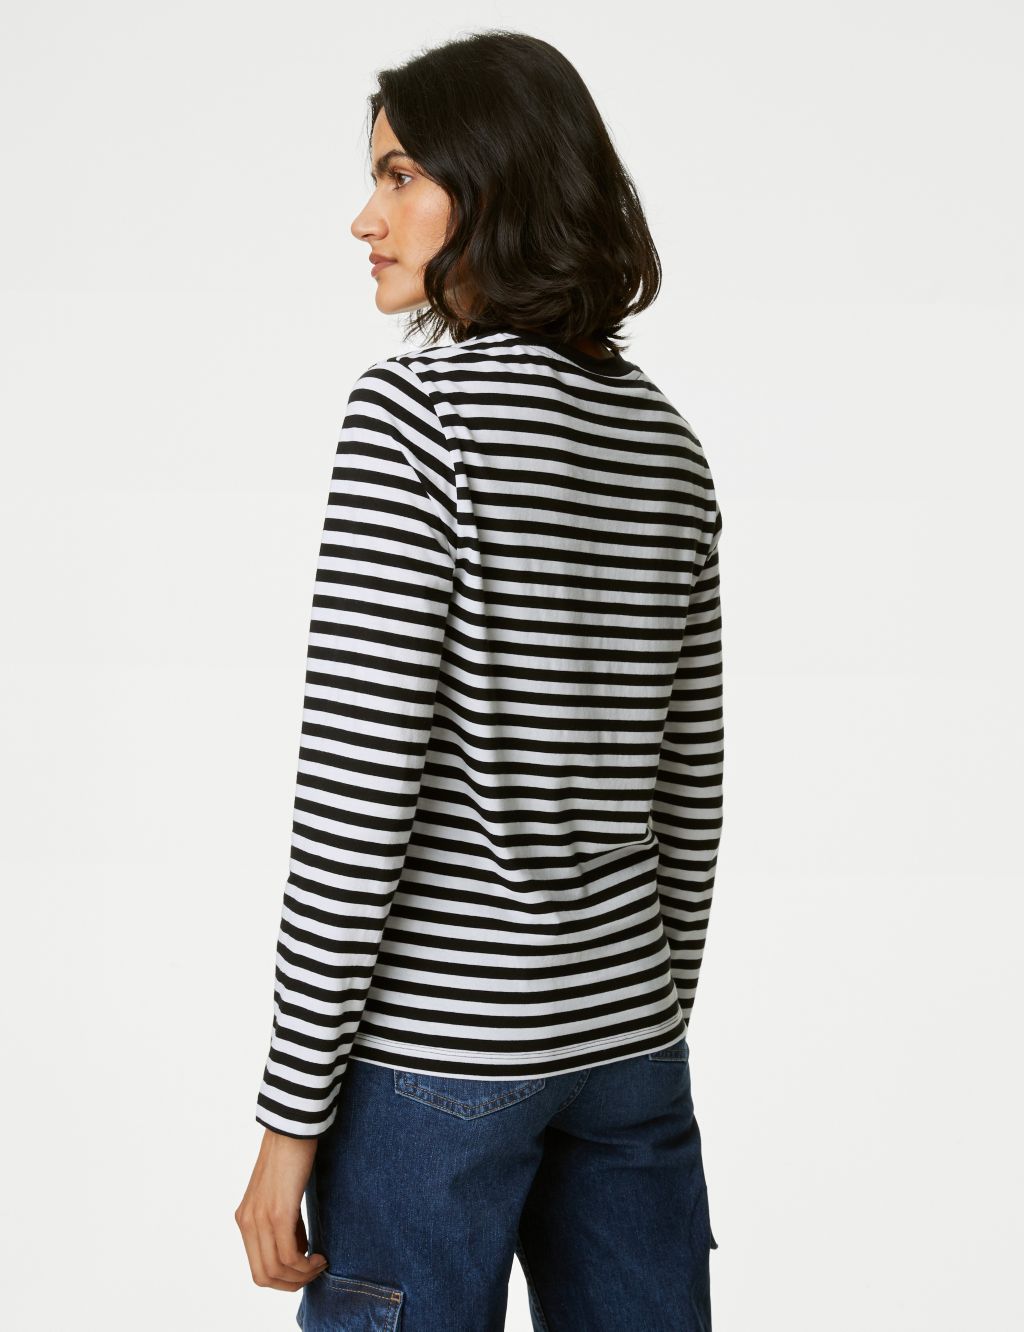 Pure Cotton Striped Everyday Fit Top image 6